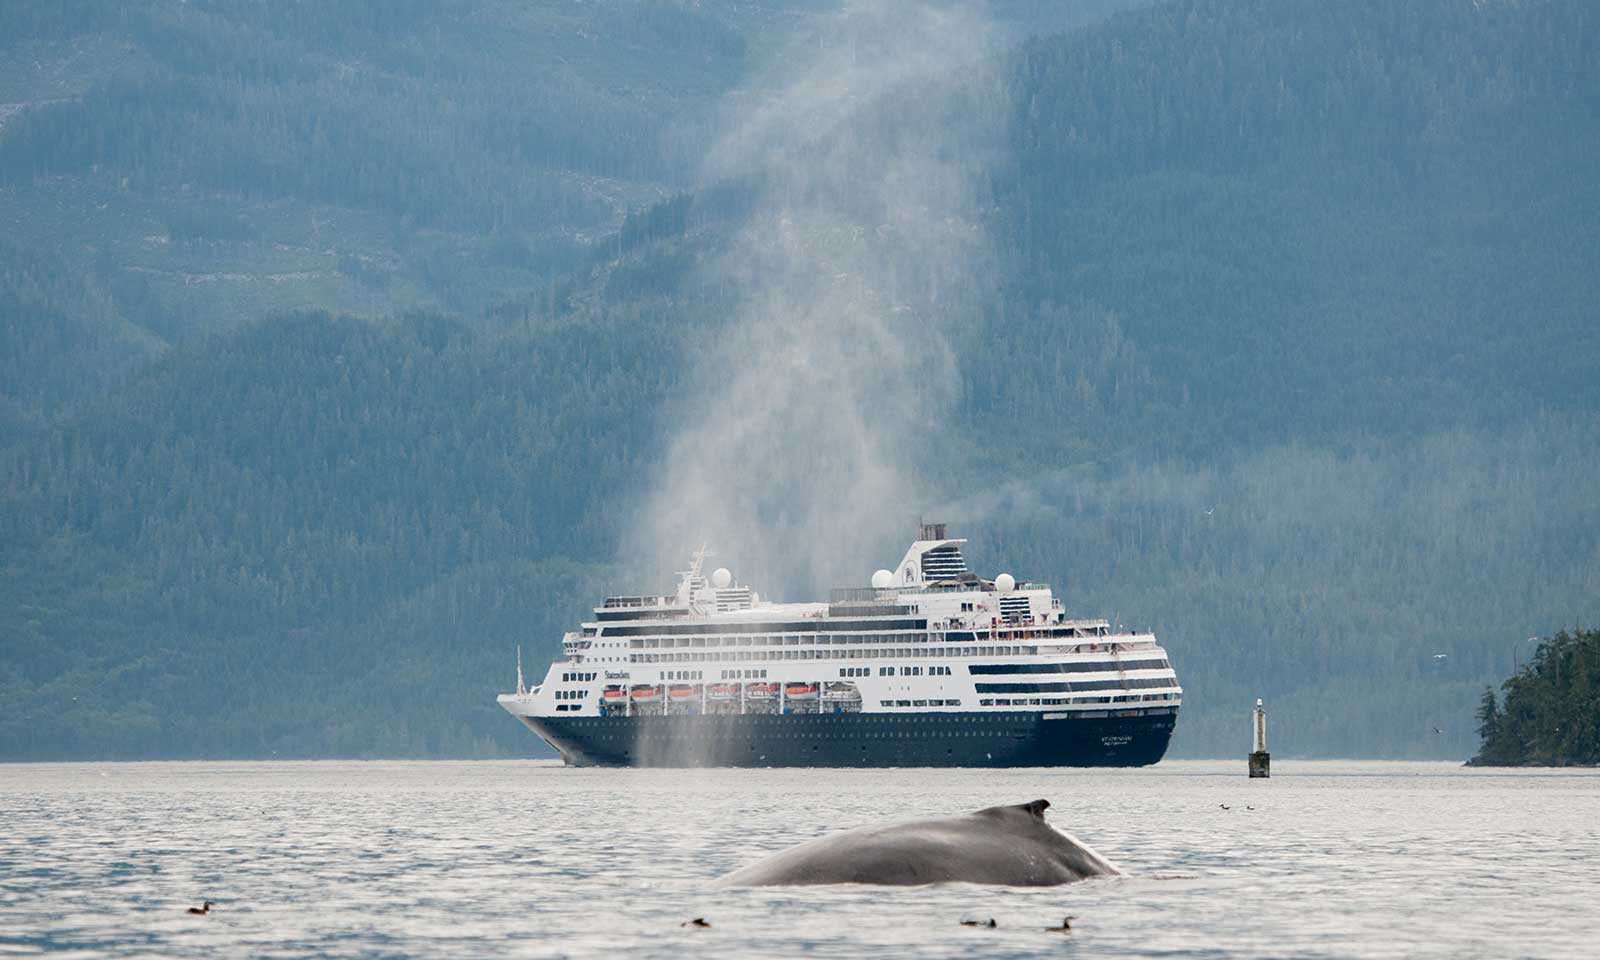 mers marine education research society whale guardian with cruise ship in background